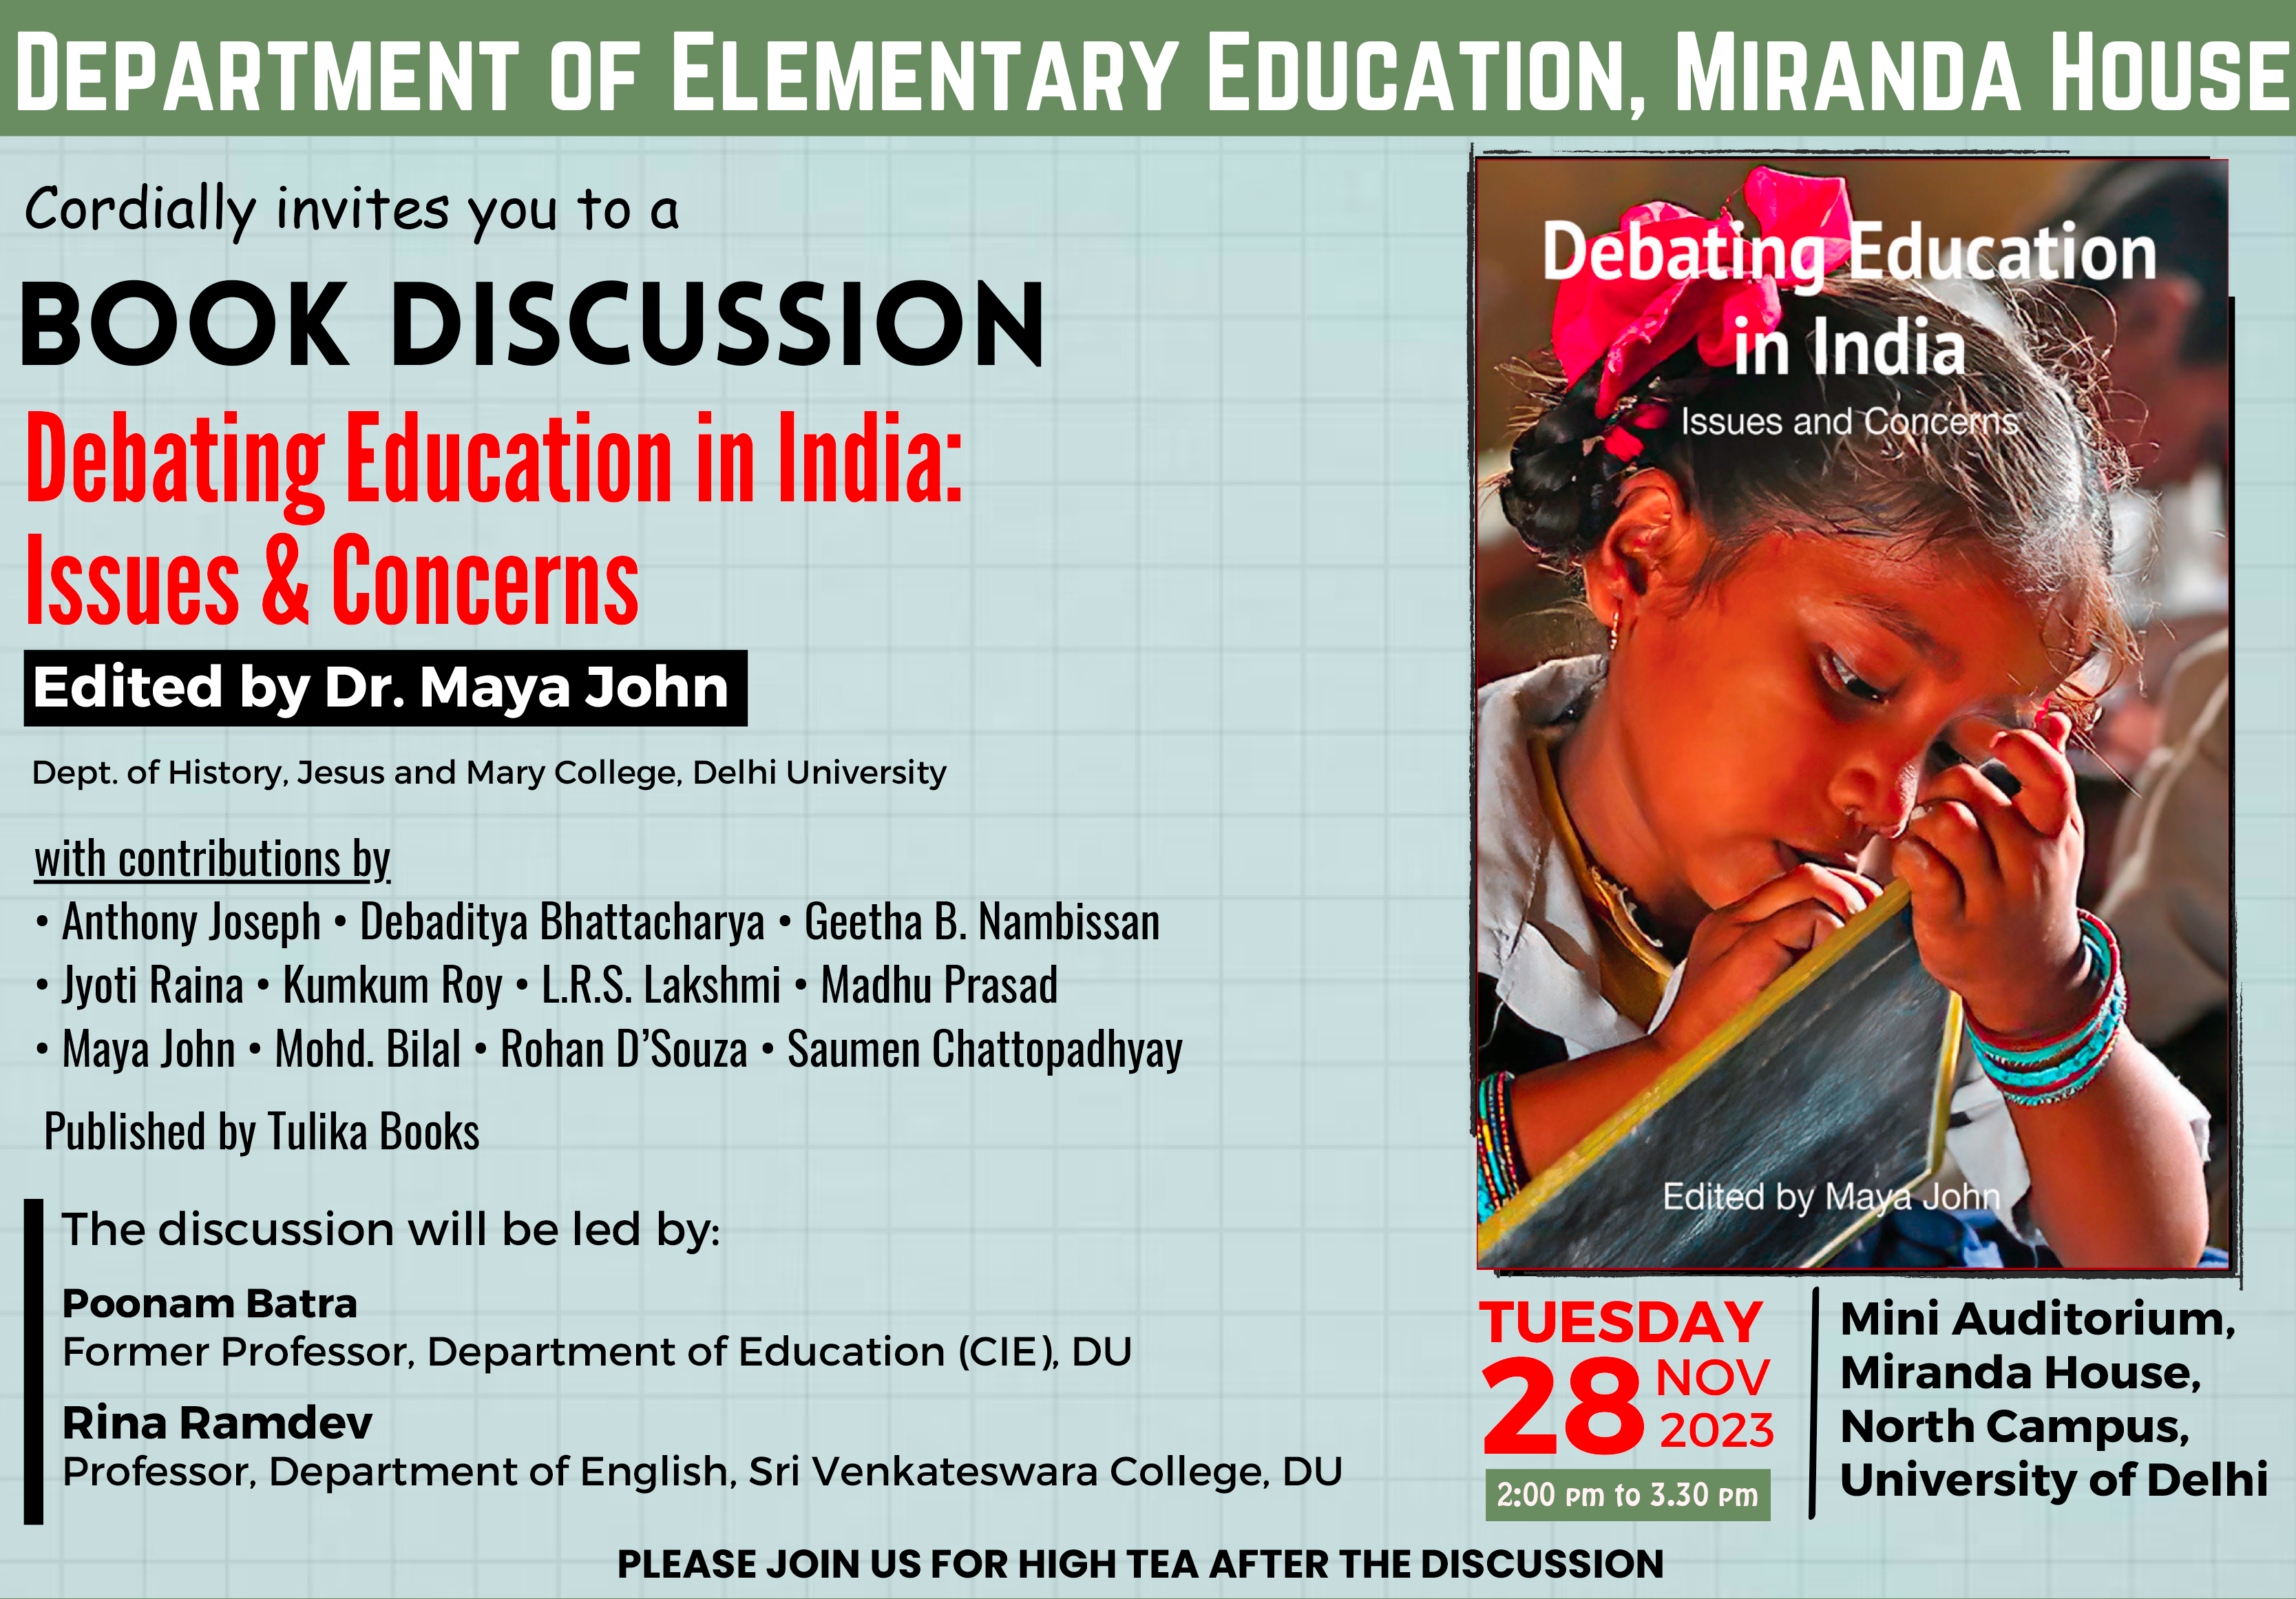 Book discussion on Debating Education in India: Issues and Concerns at Miranda House, University of Delhi